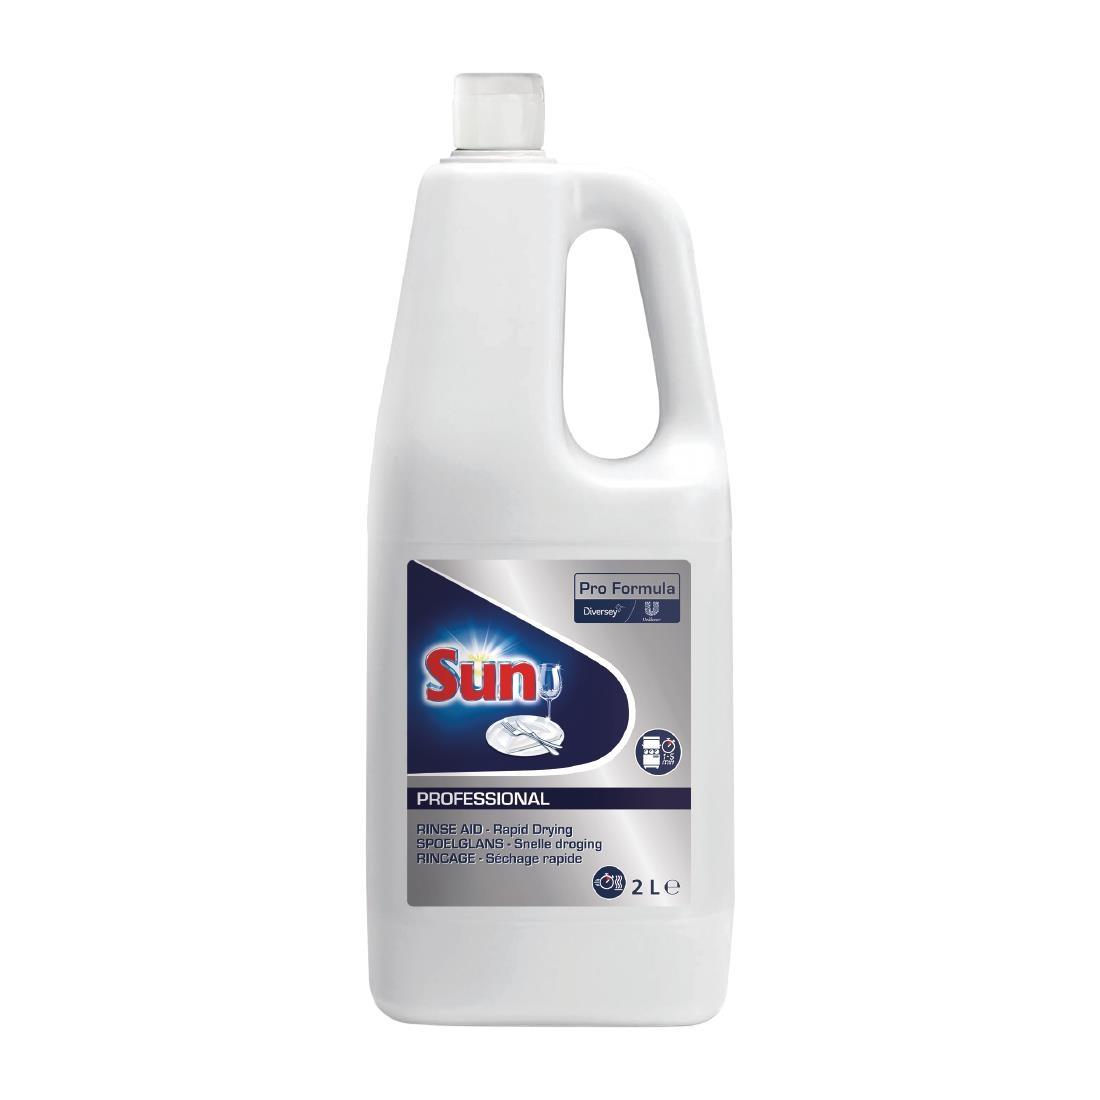 Sun Pro Formula Dishwasher Rinse Aid Concentrate 2Ltr (6 Pack) - FB602  - 1